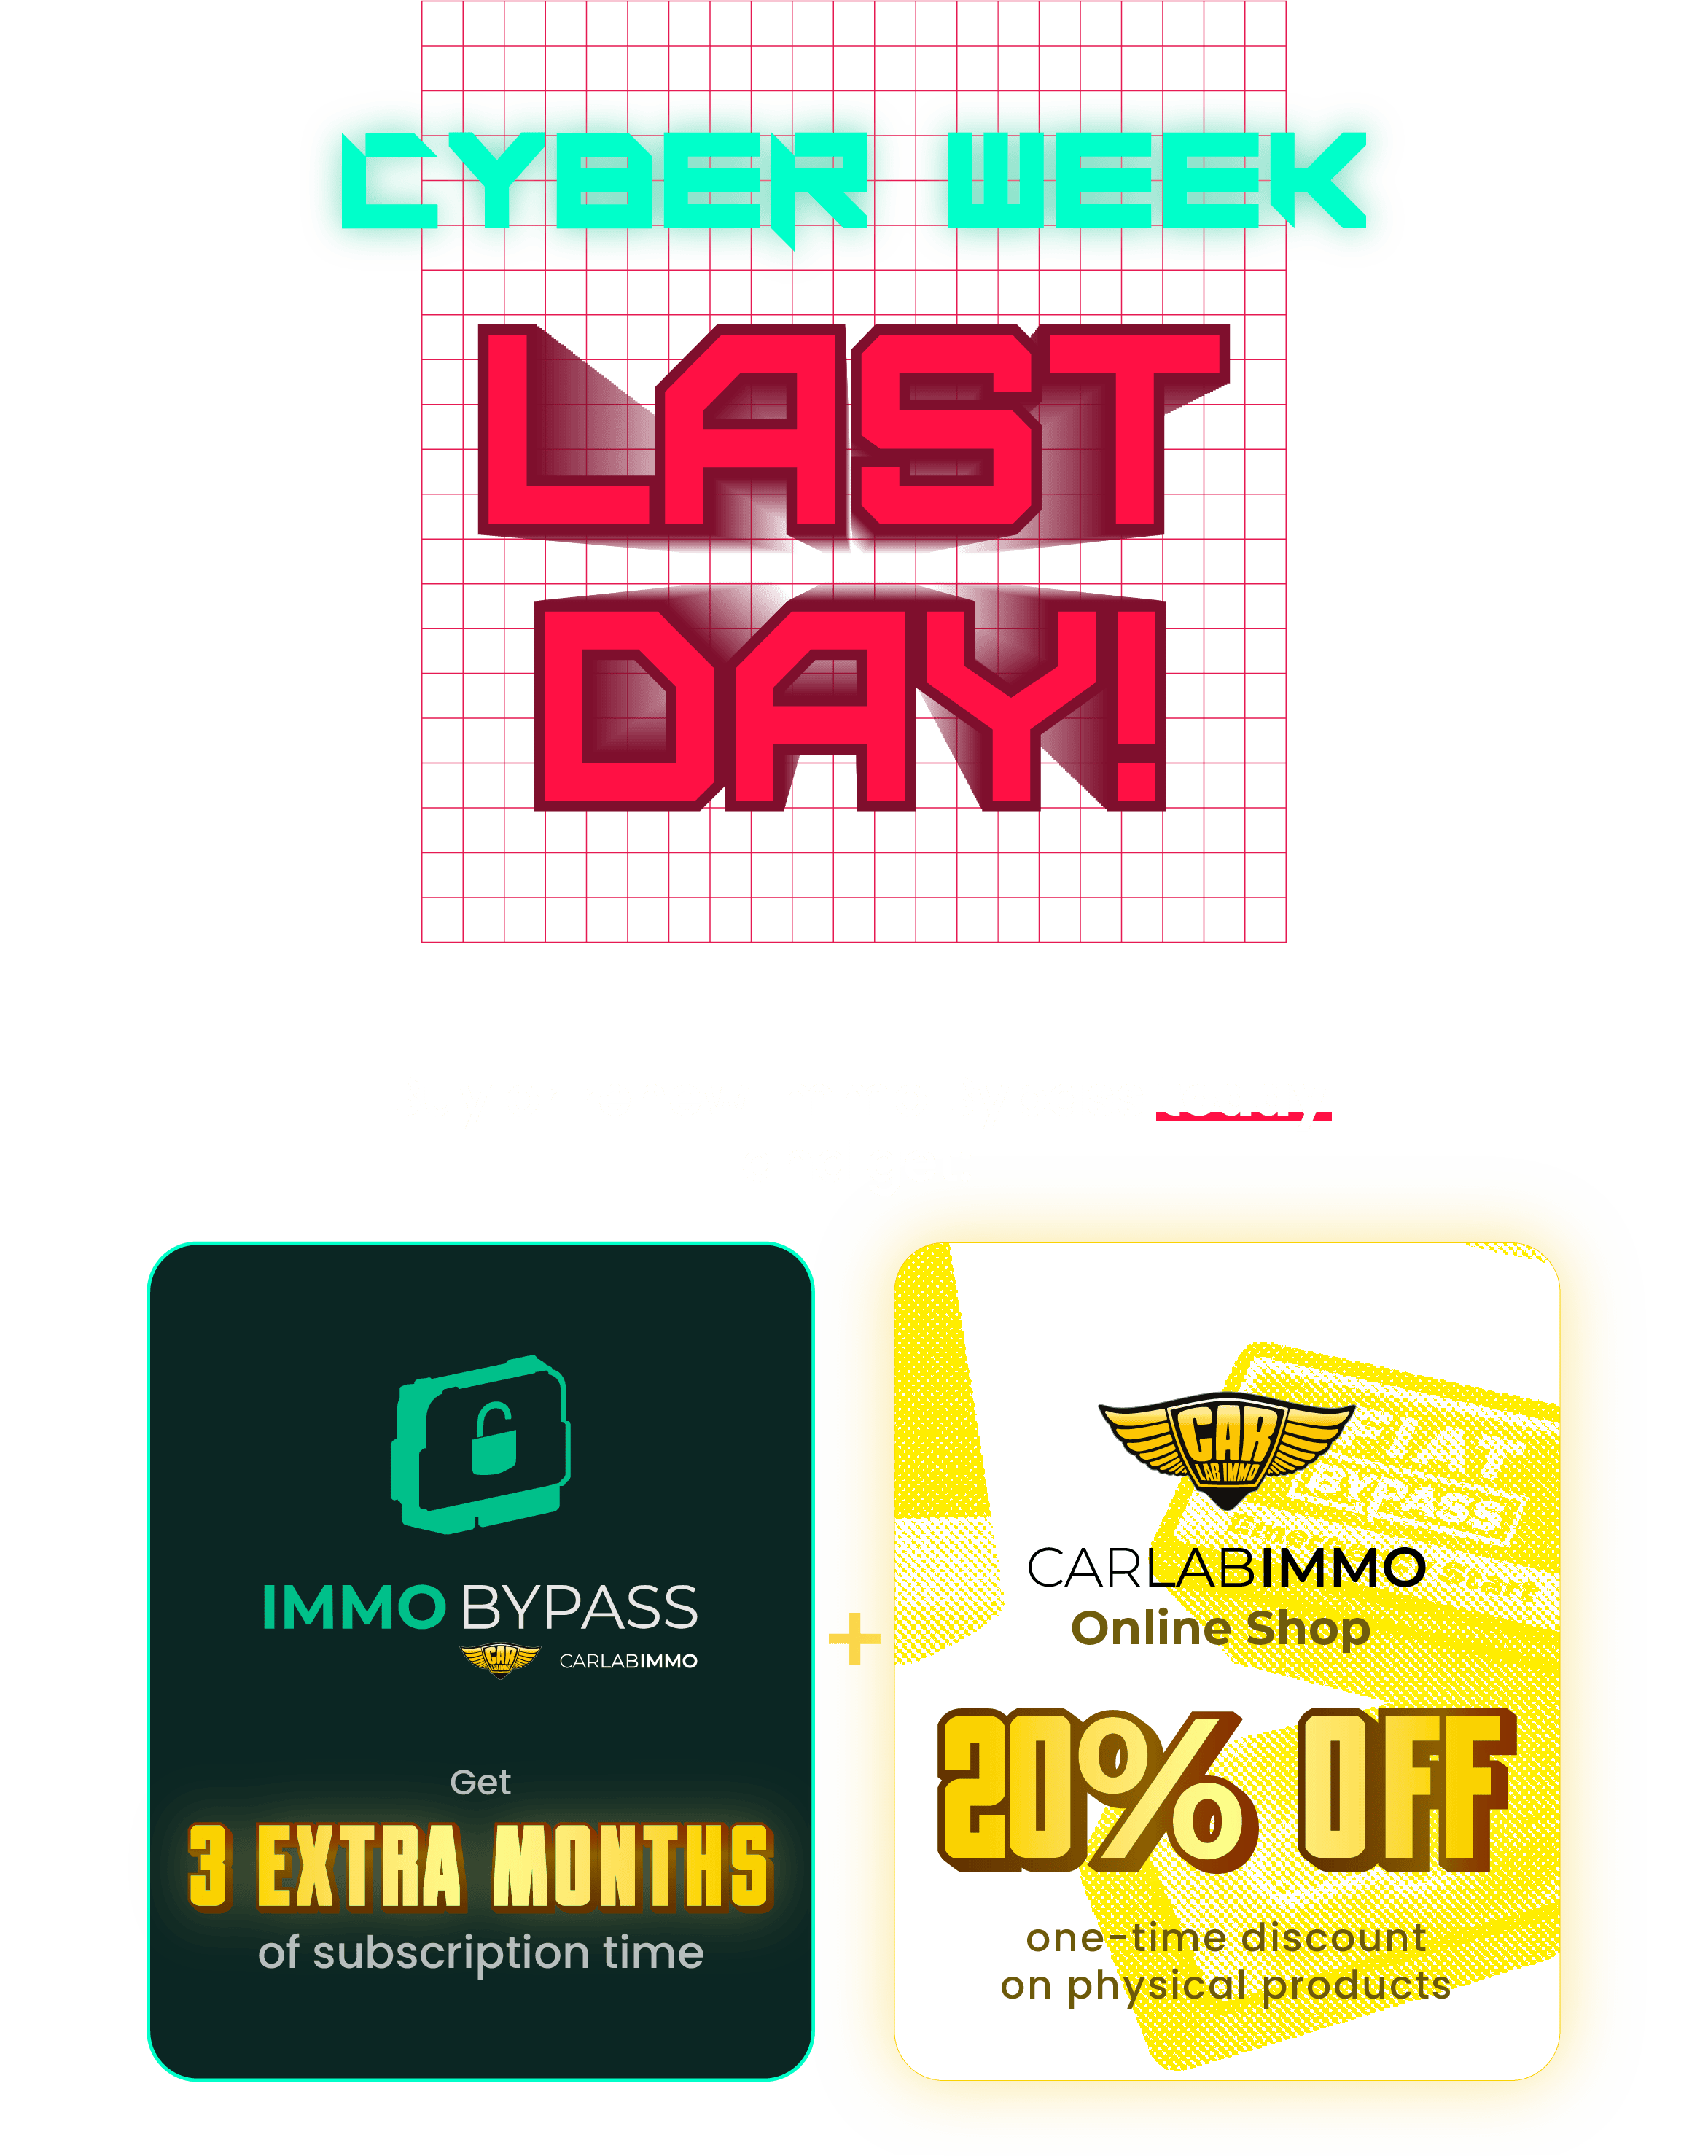 Bur or renew Immo Bypass and get 3 extra months added to your subscription time for FREE!